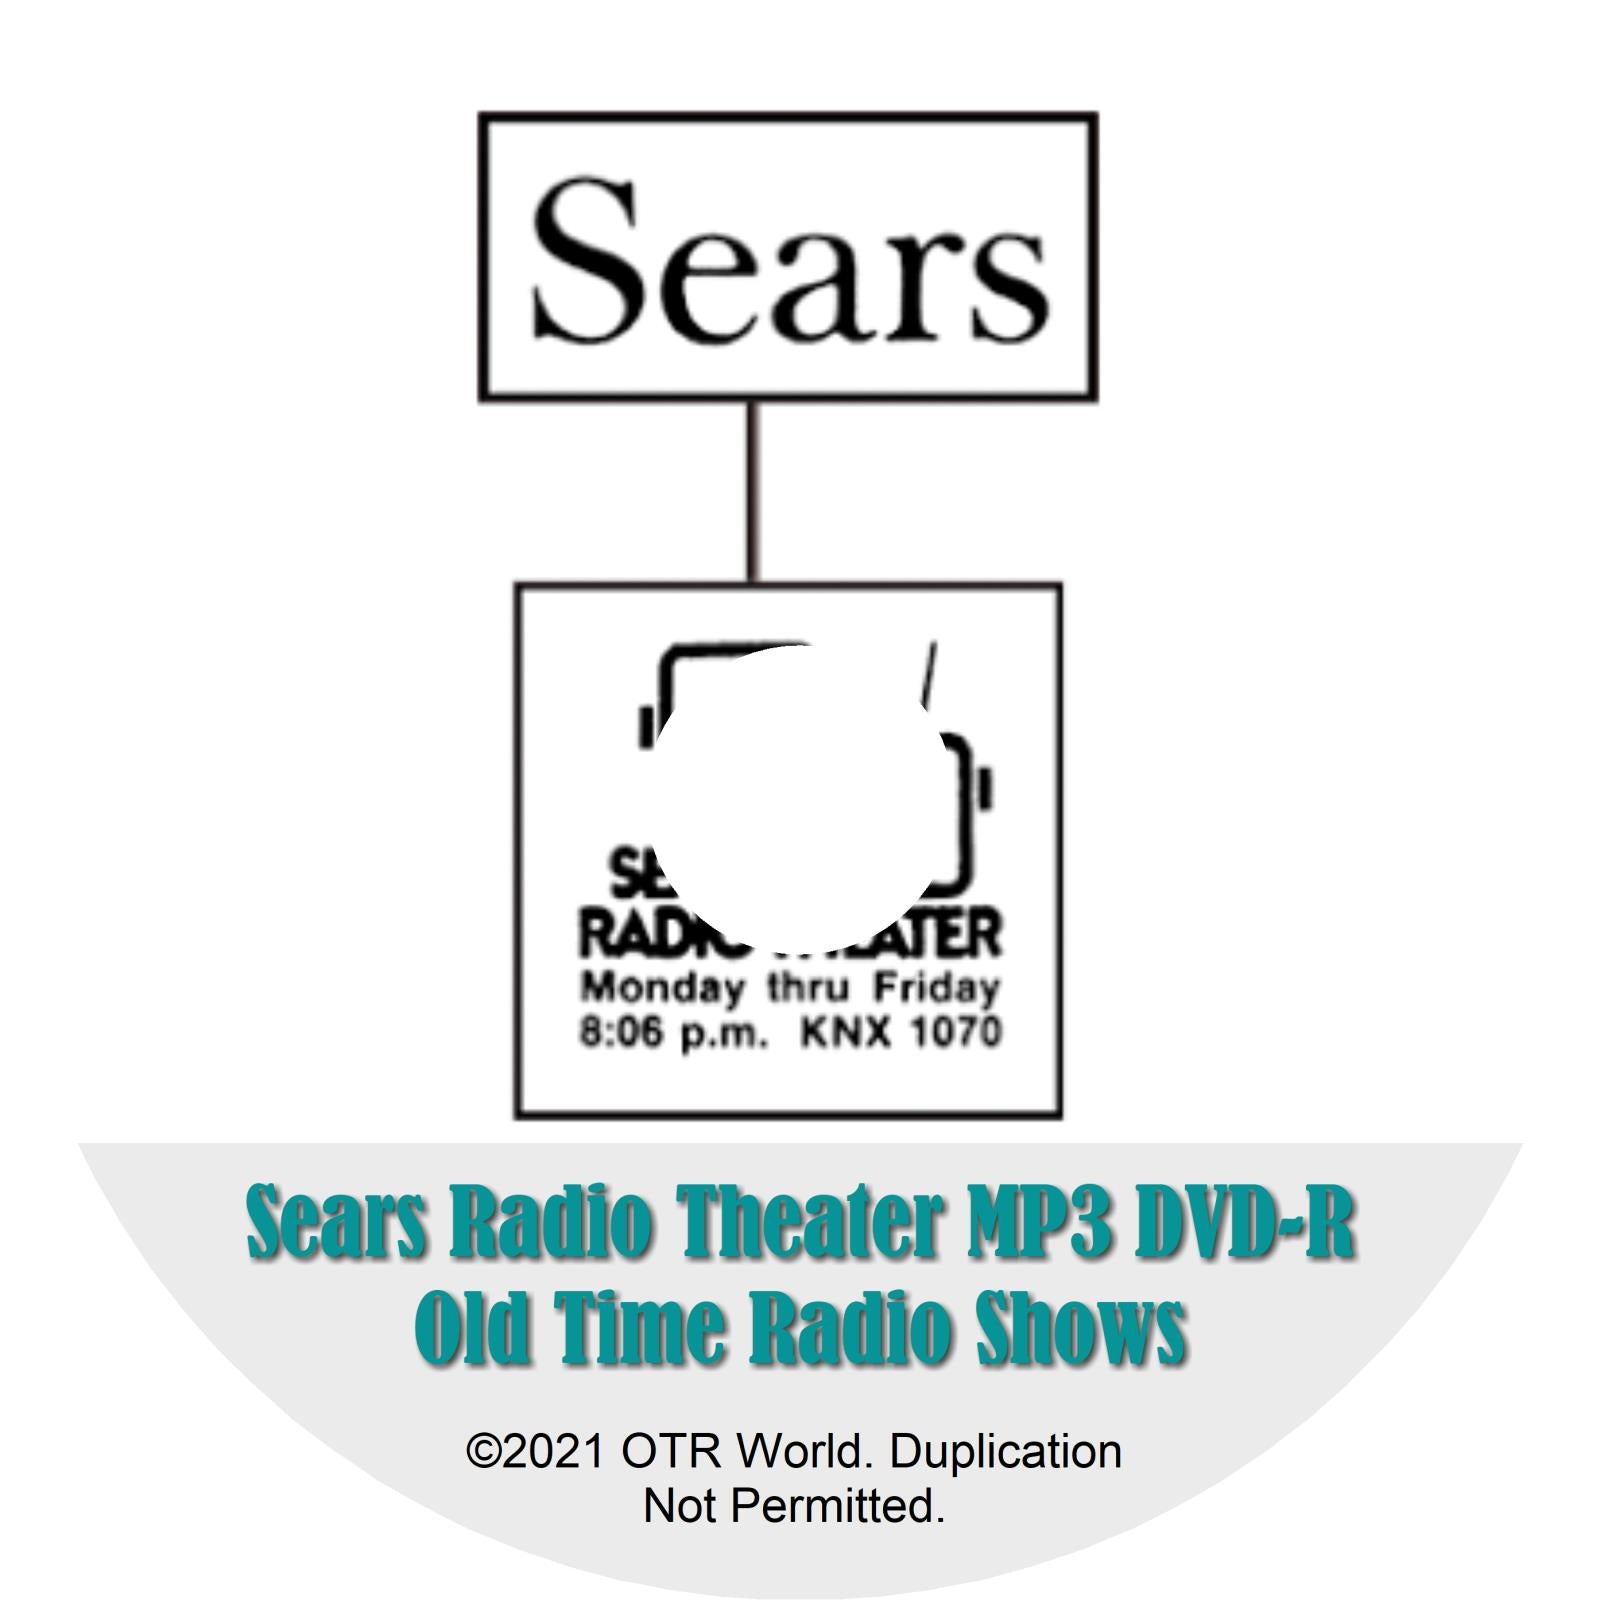 Sears Radio Theater OTRS OTR Old Time Radio Shows MP3 On DVD-R 129 Episodes